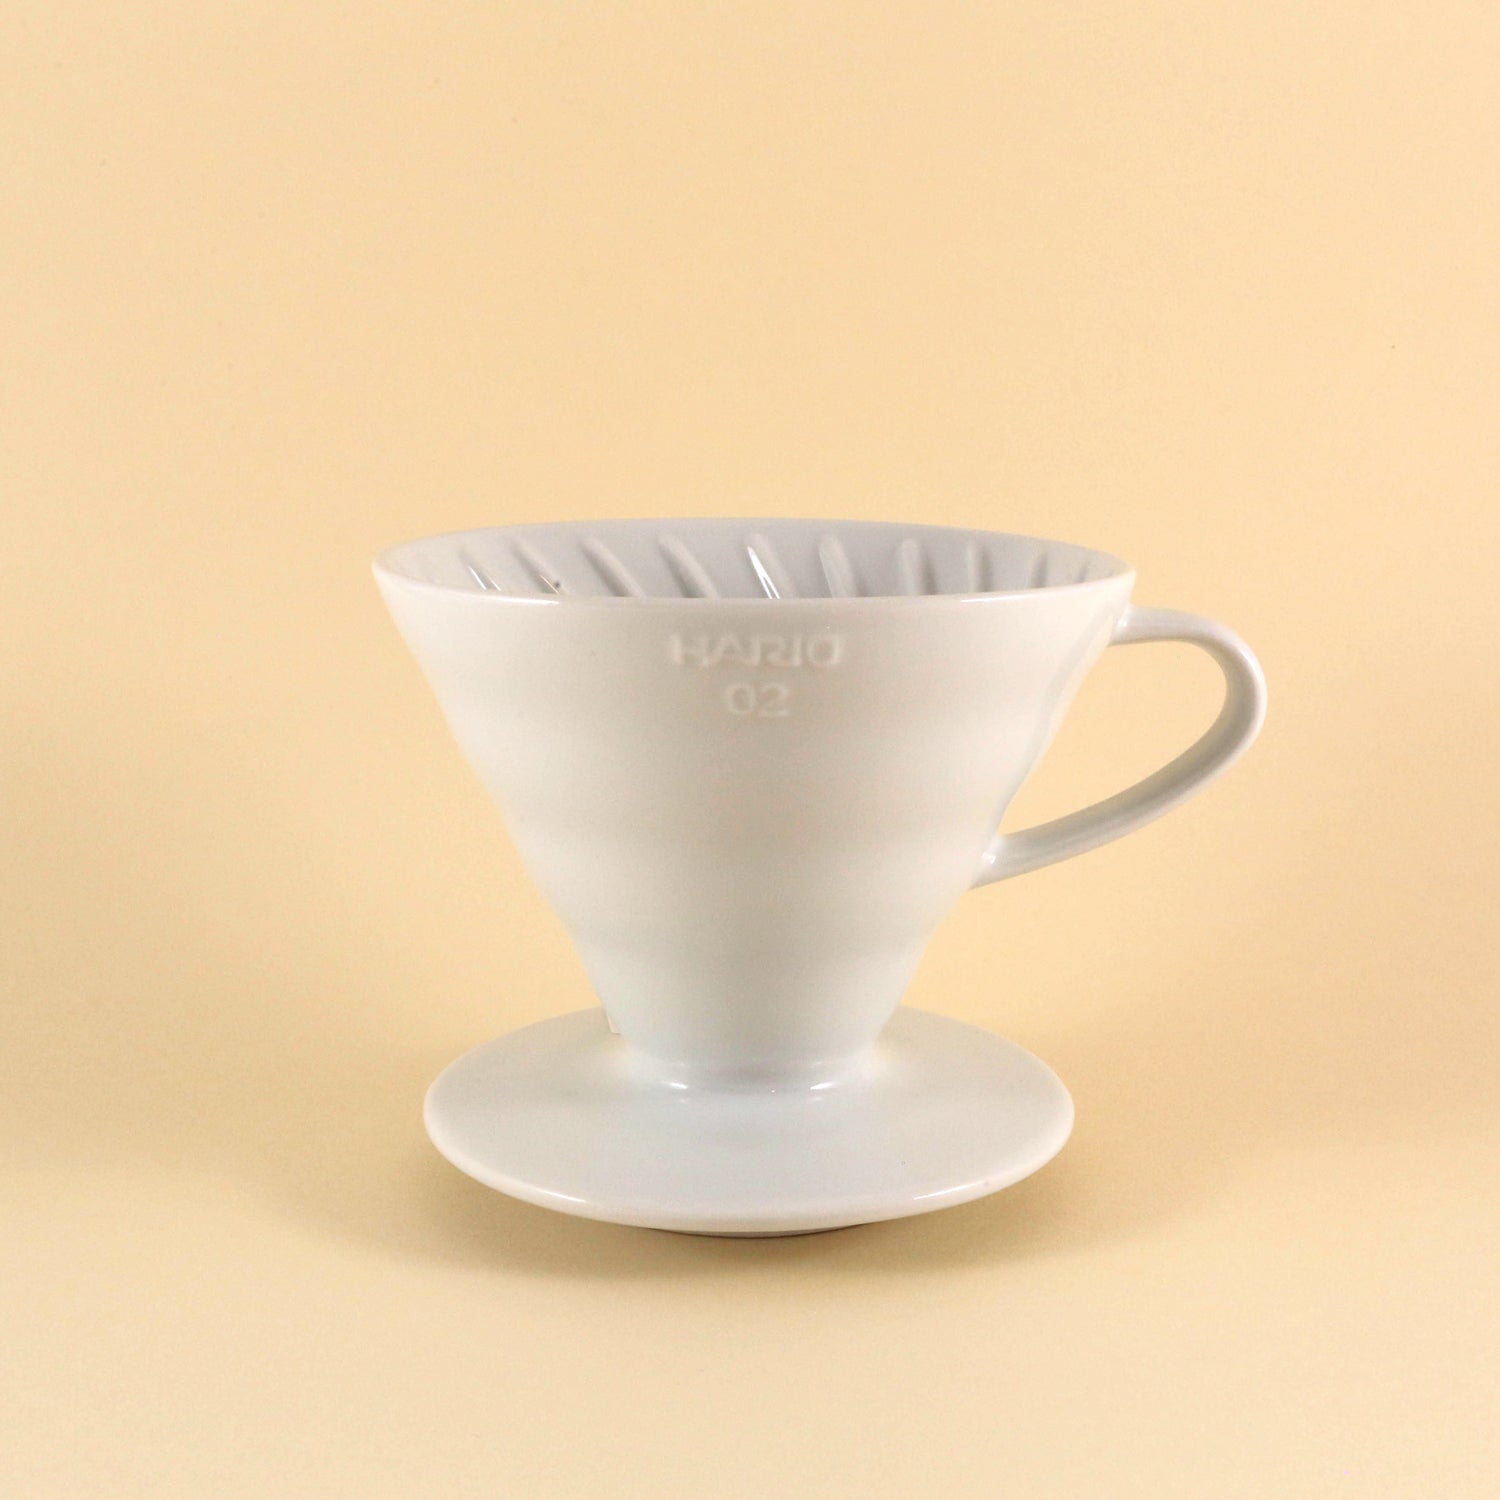 A white vendor-unknown Hario Ceramic V60 Dripper with a reusable filter sitting on a matching saucer against a soft beige background.